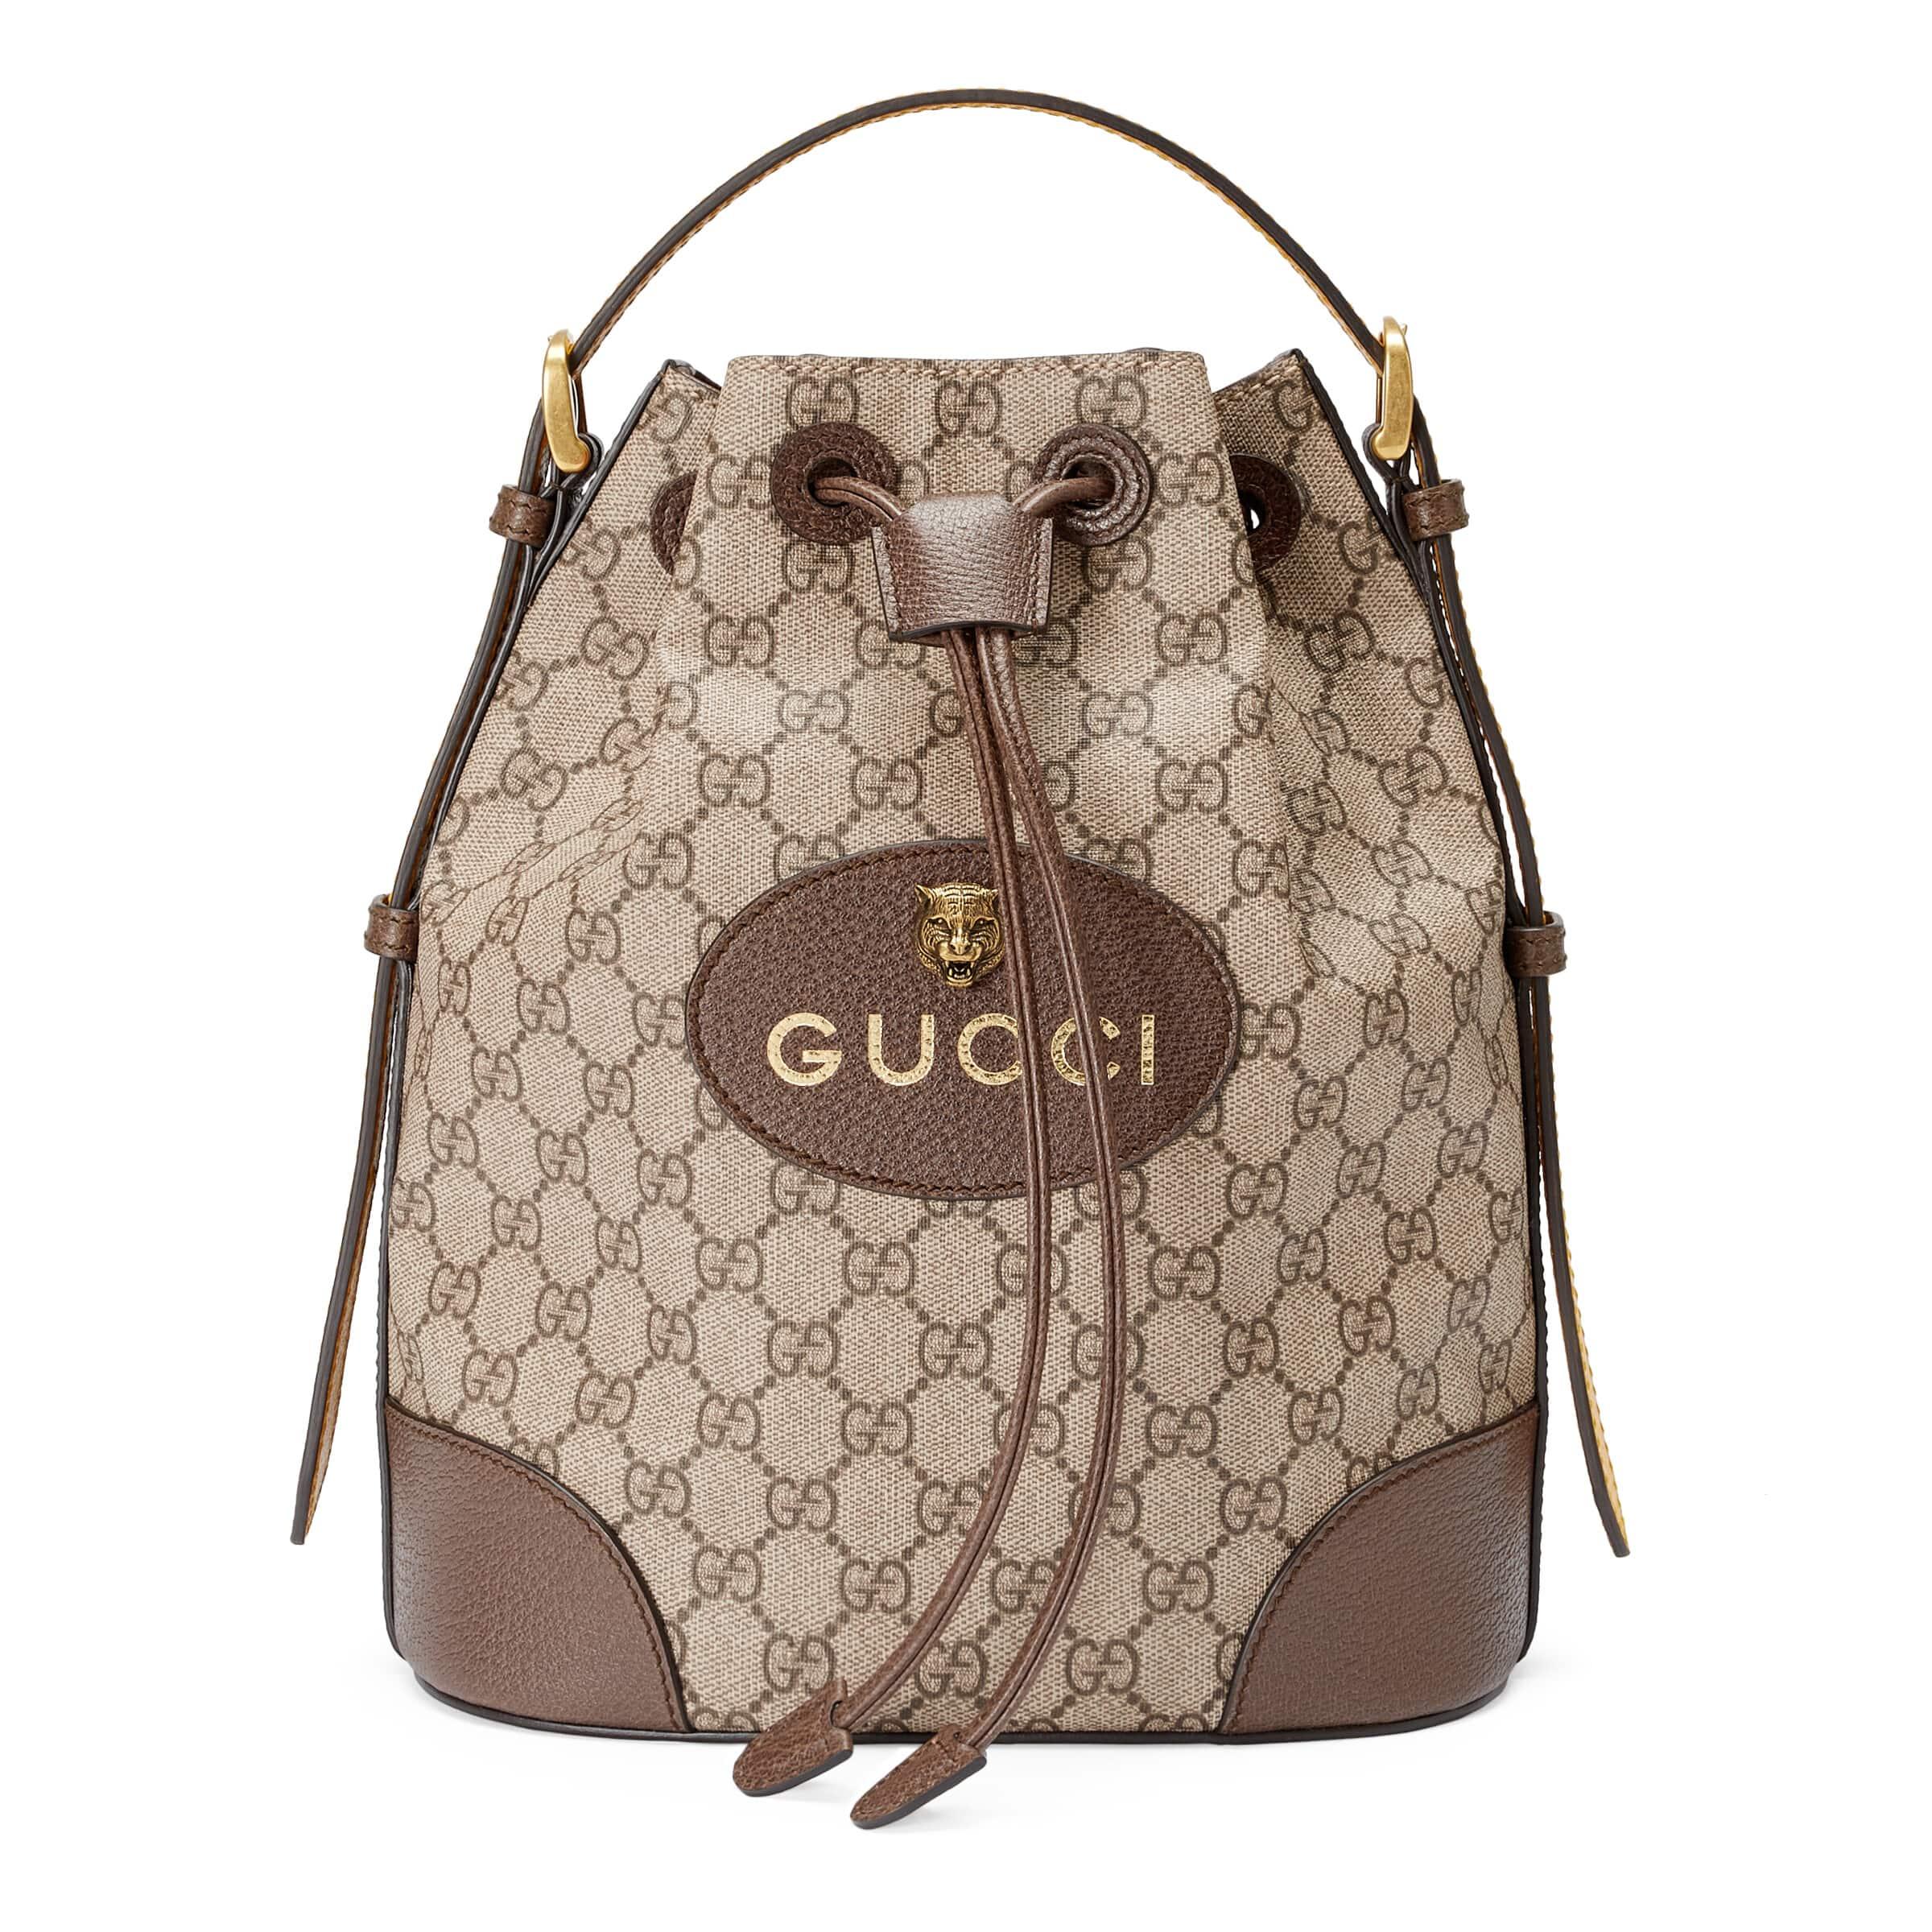 Gucci Leather Neo Vintage gg Supreme Backpack in Brown (Natural) - Save 8%  - Lyst